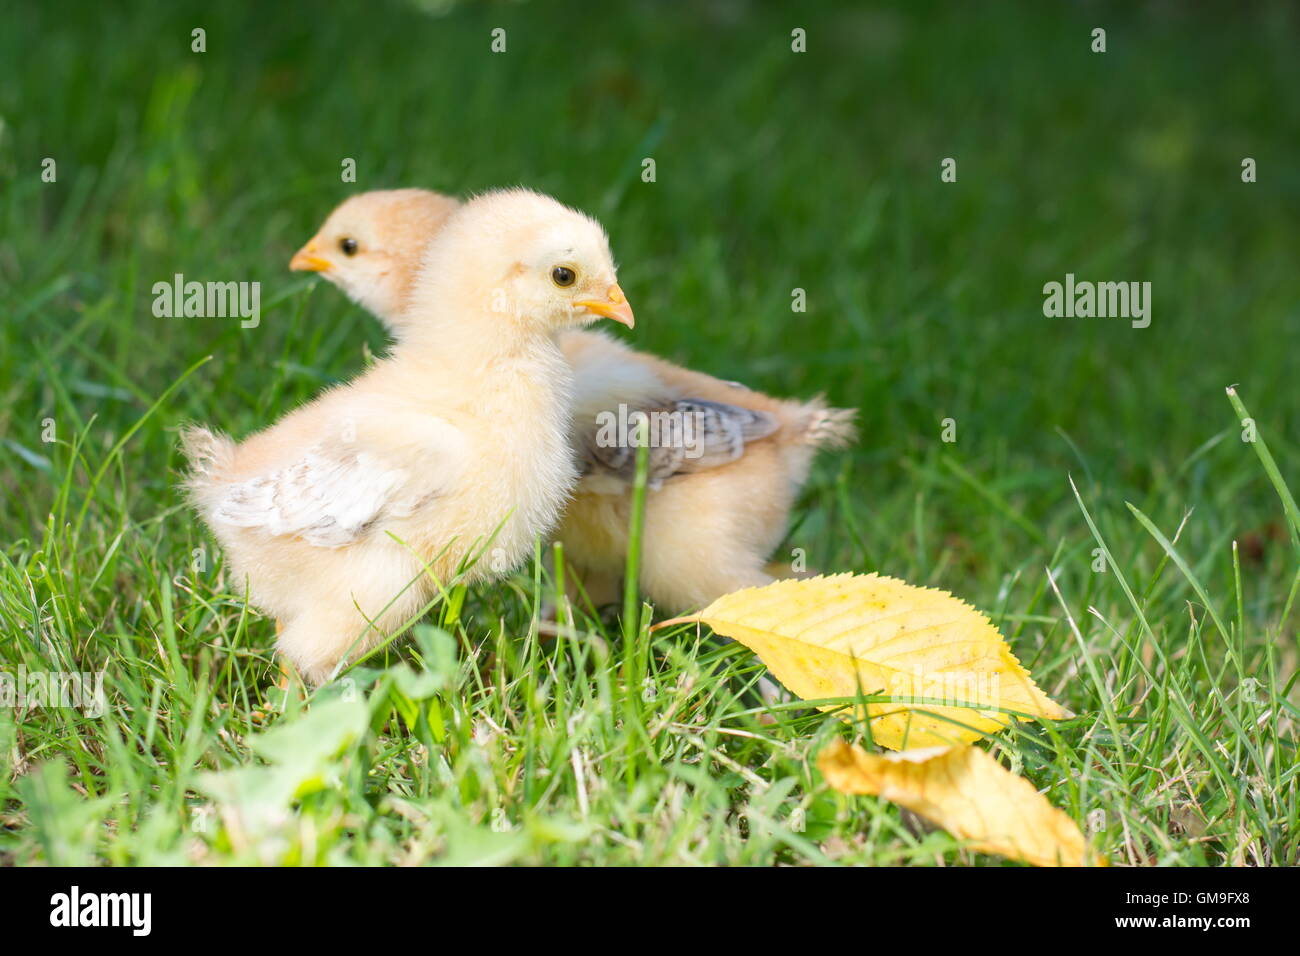 Baby chickens walking on green grass Stock Photo